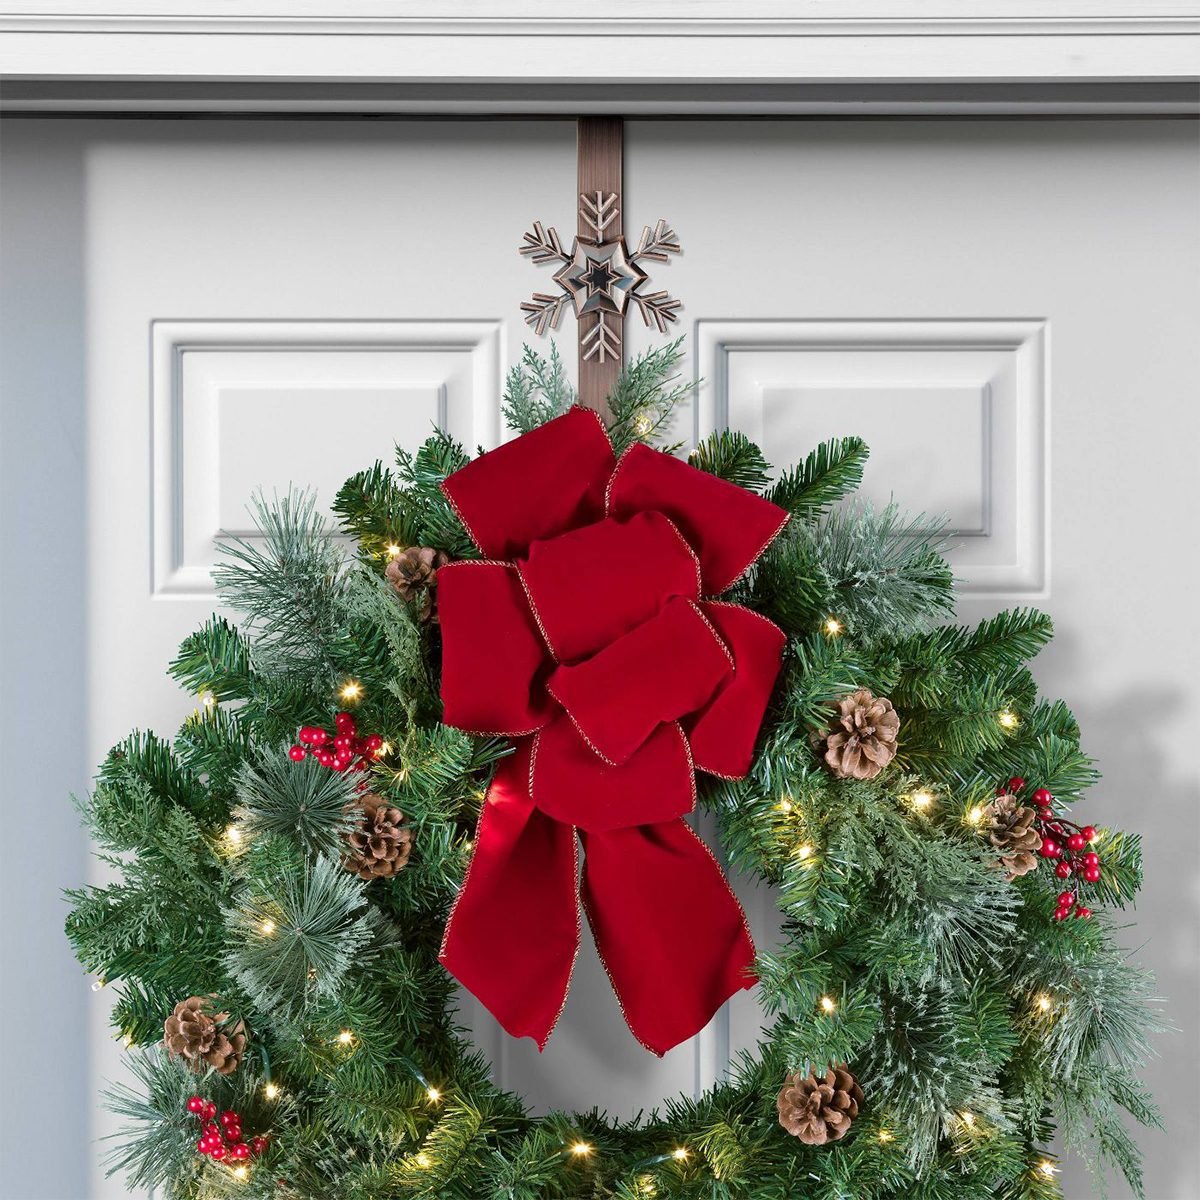 How to Make a DIY Christmas Wreath in 7 Steps